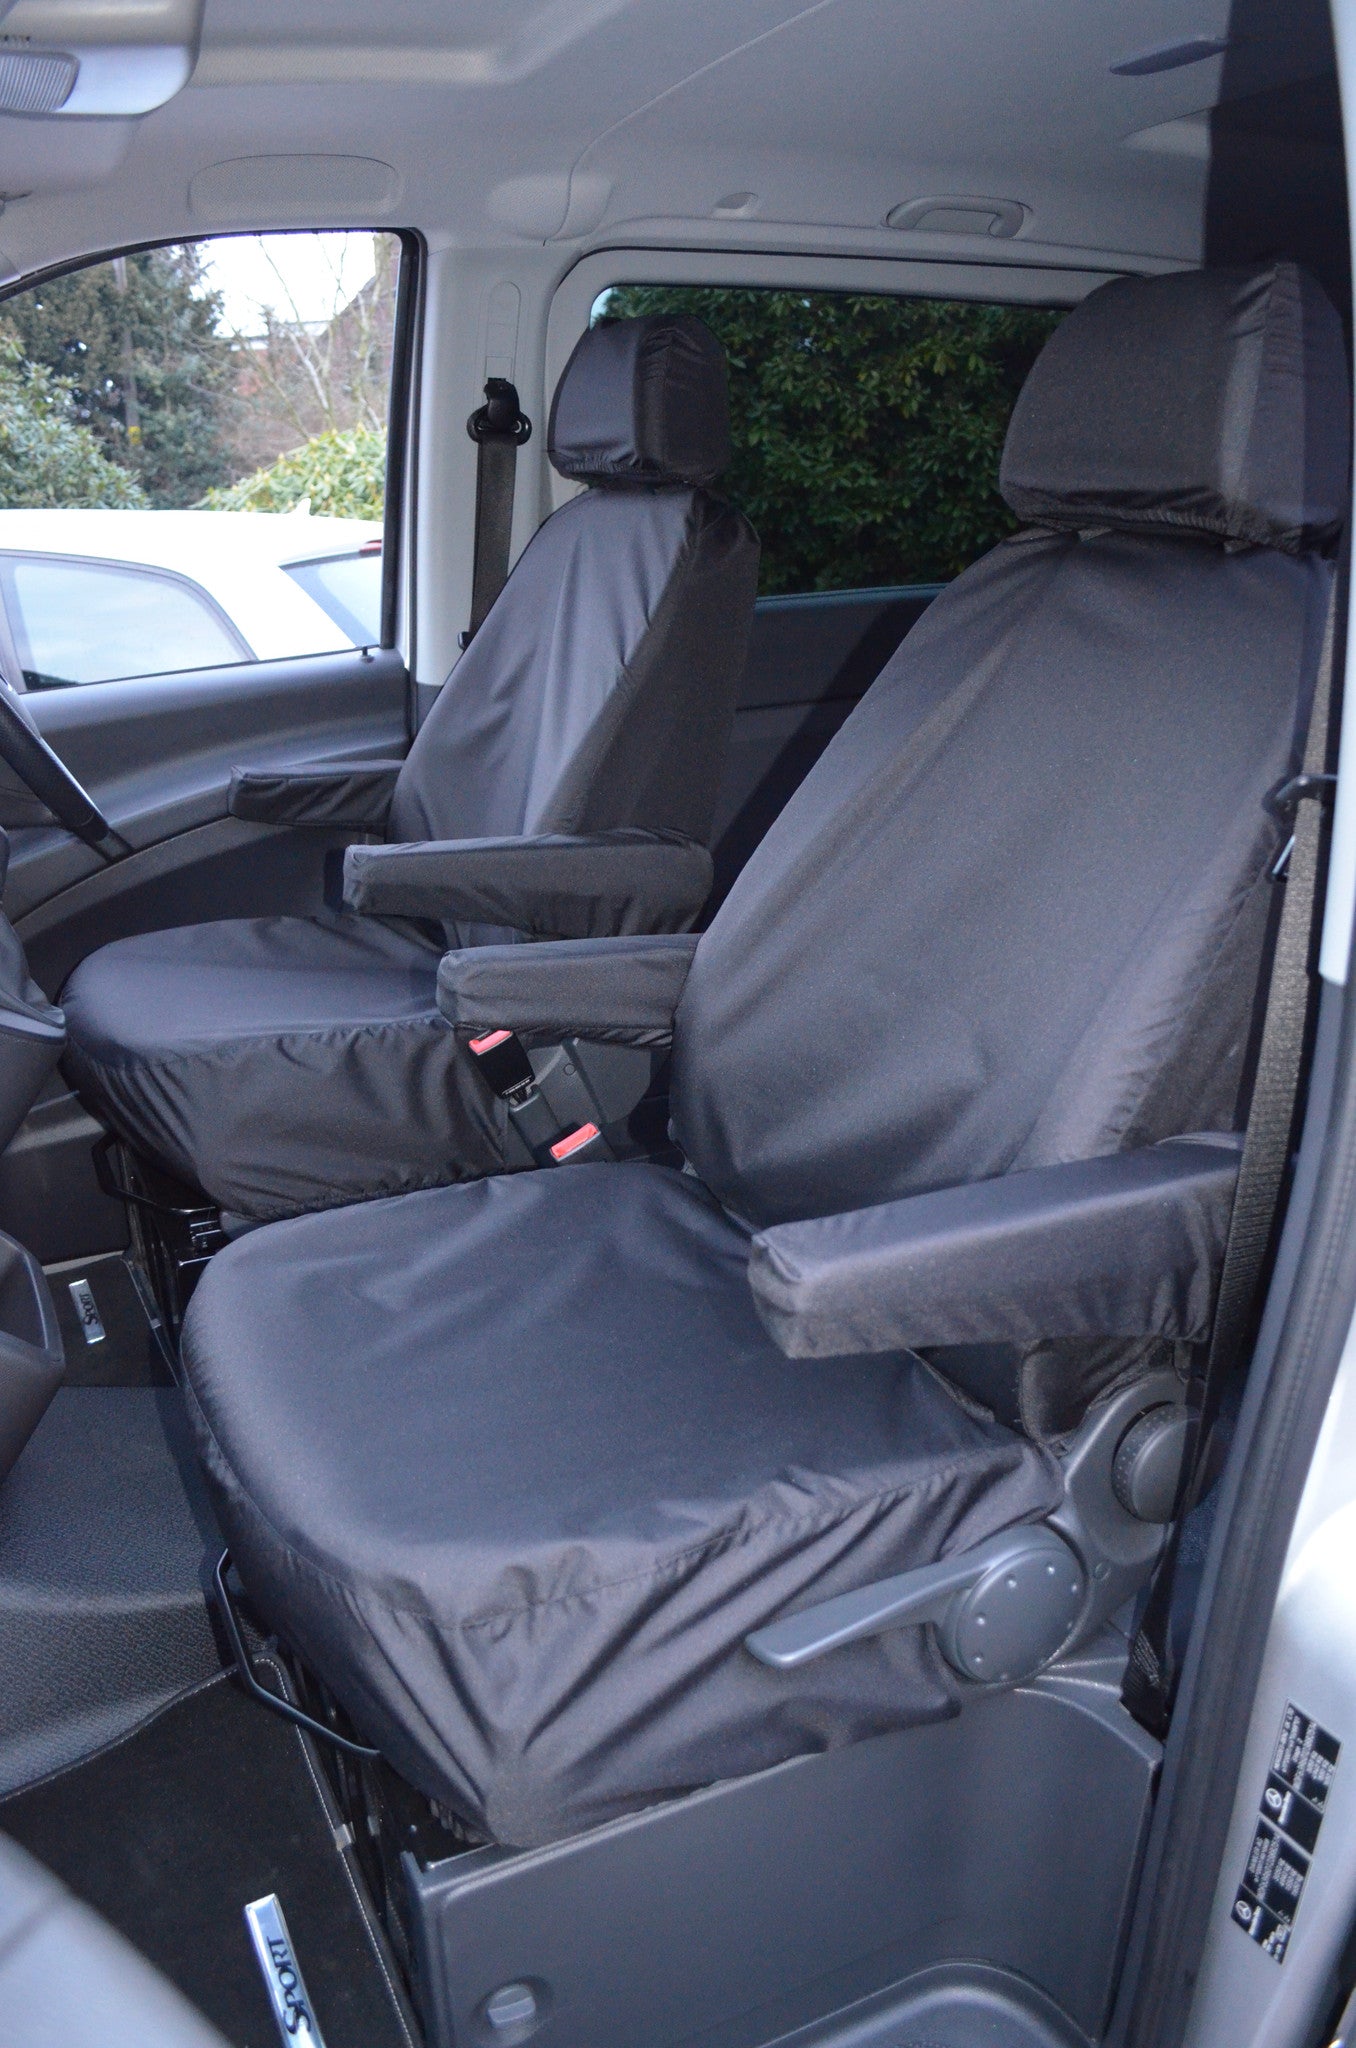 Mercedes-Benz Vito 2003-15 Tailored Front Seat Covers Front Pair With Armrests / Black Turtle Covers Ltd